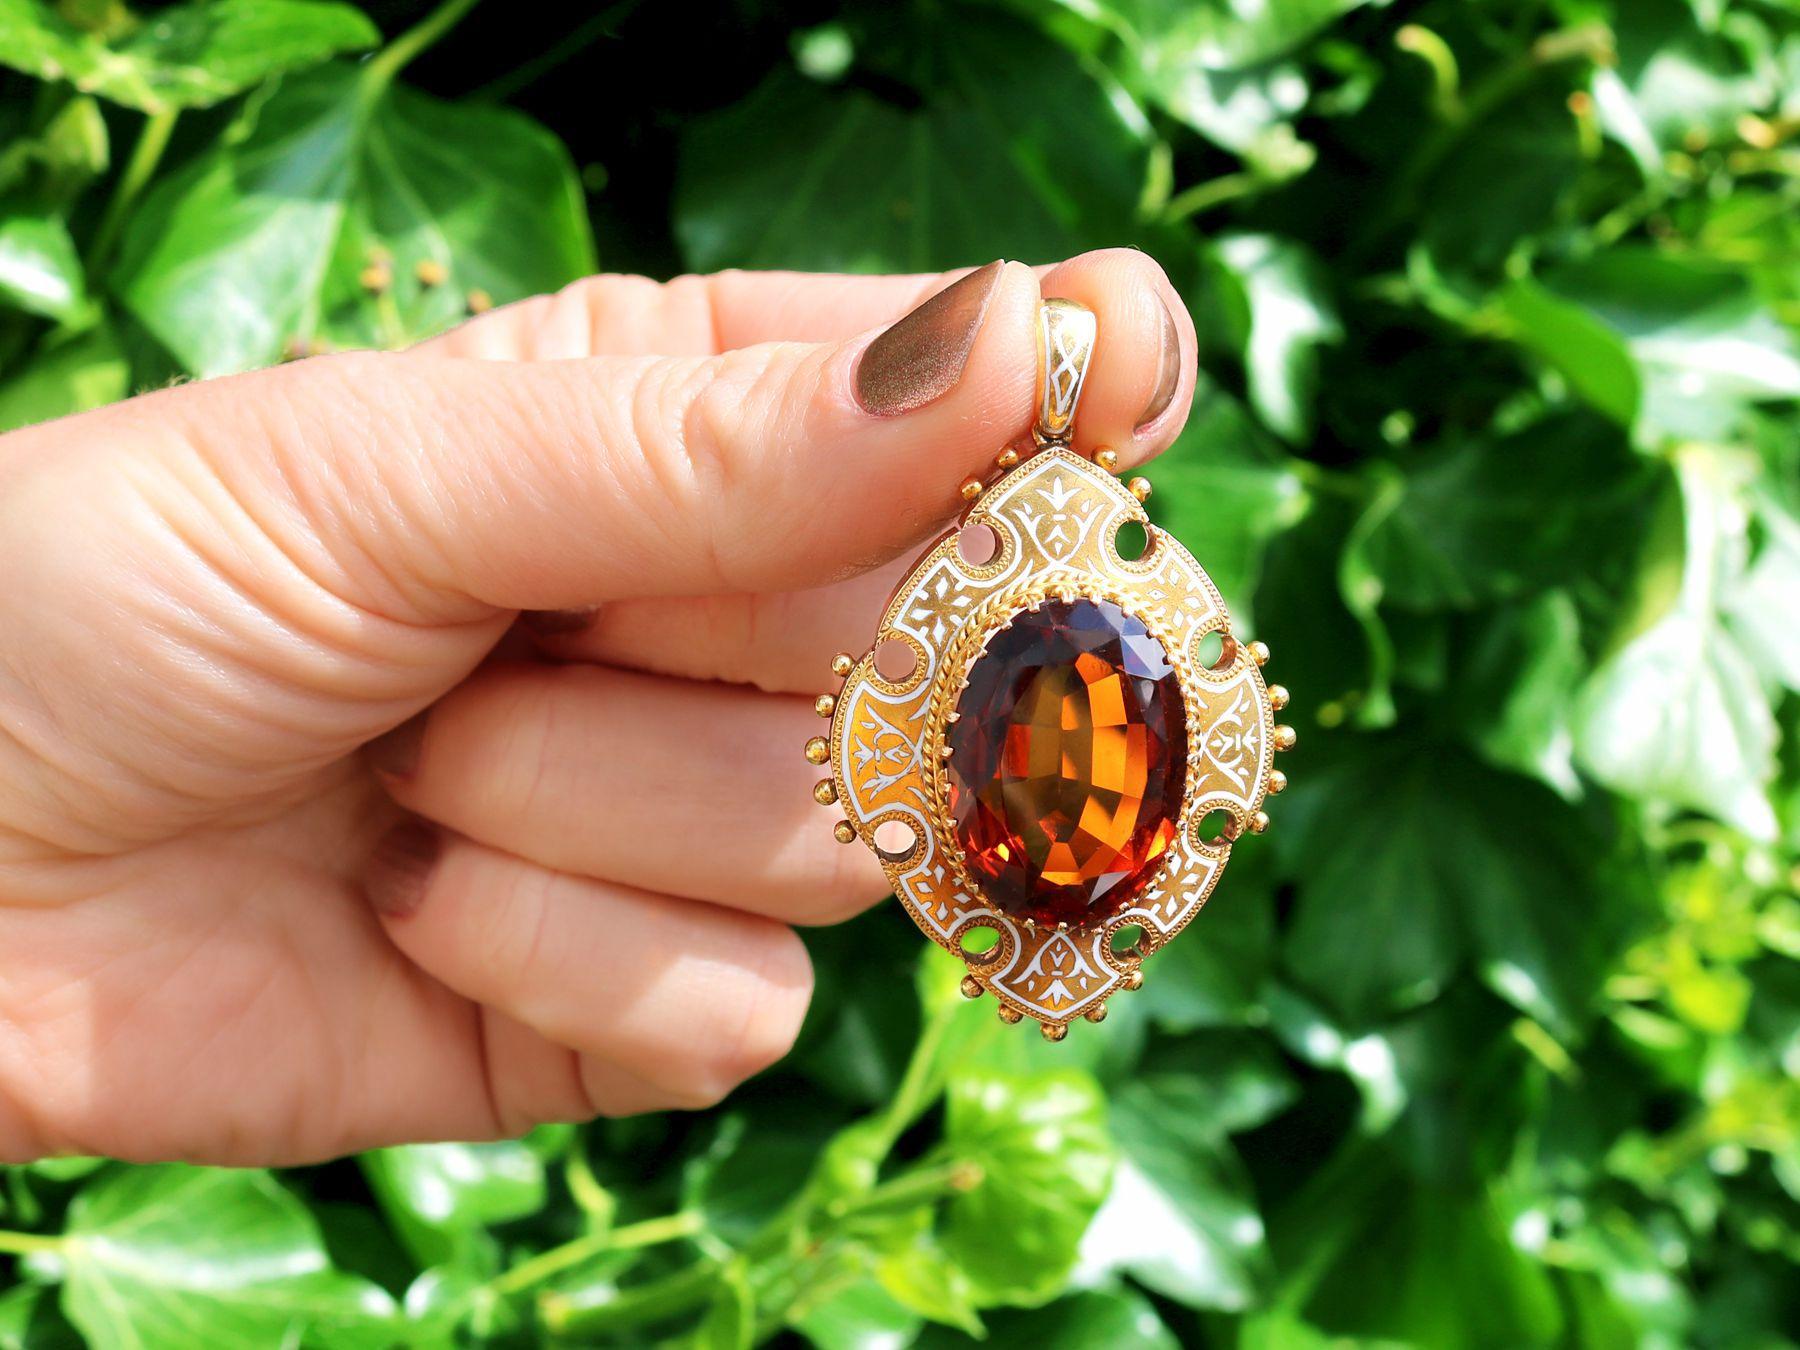 A stunning, fine and impressive antique Victorian 21.63 carat citrine, enamel and 18 karat yellow gold pendant; part of our diverse antique jewelry and estate jewelry collections.

This stunning, fine and impressive antique pendant has been crafted